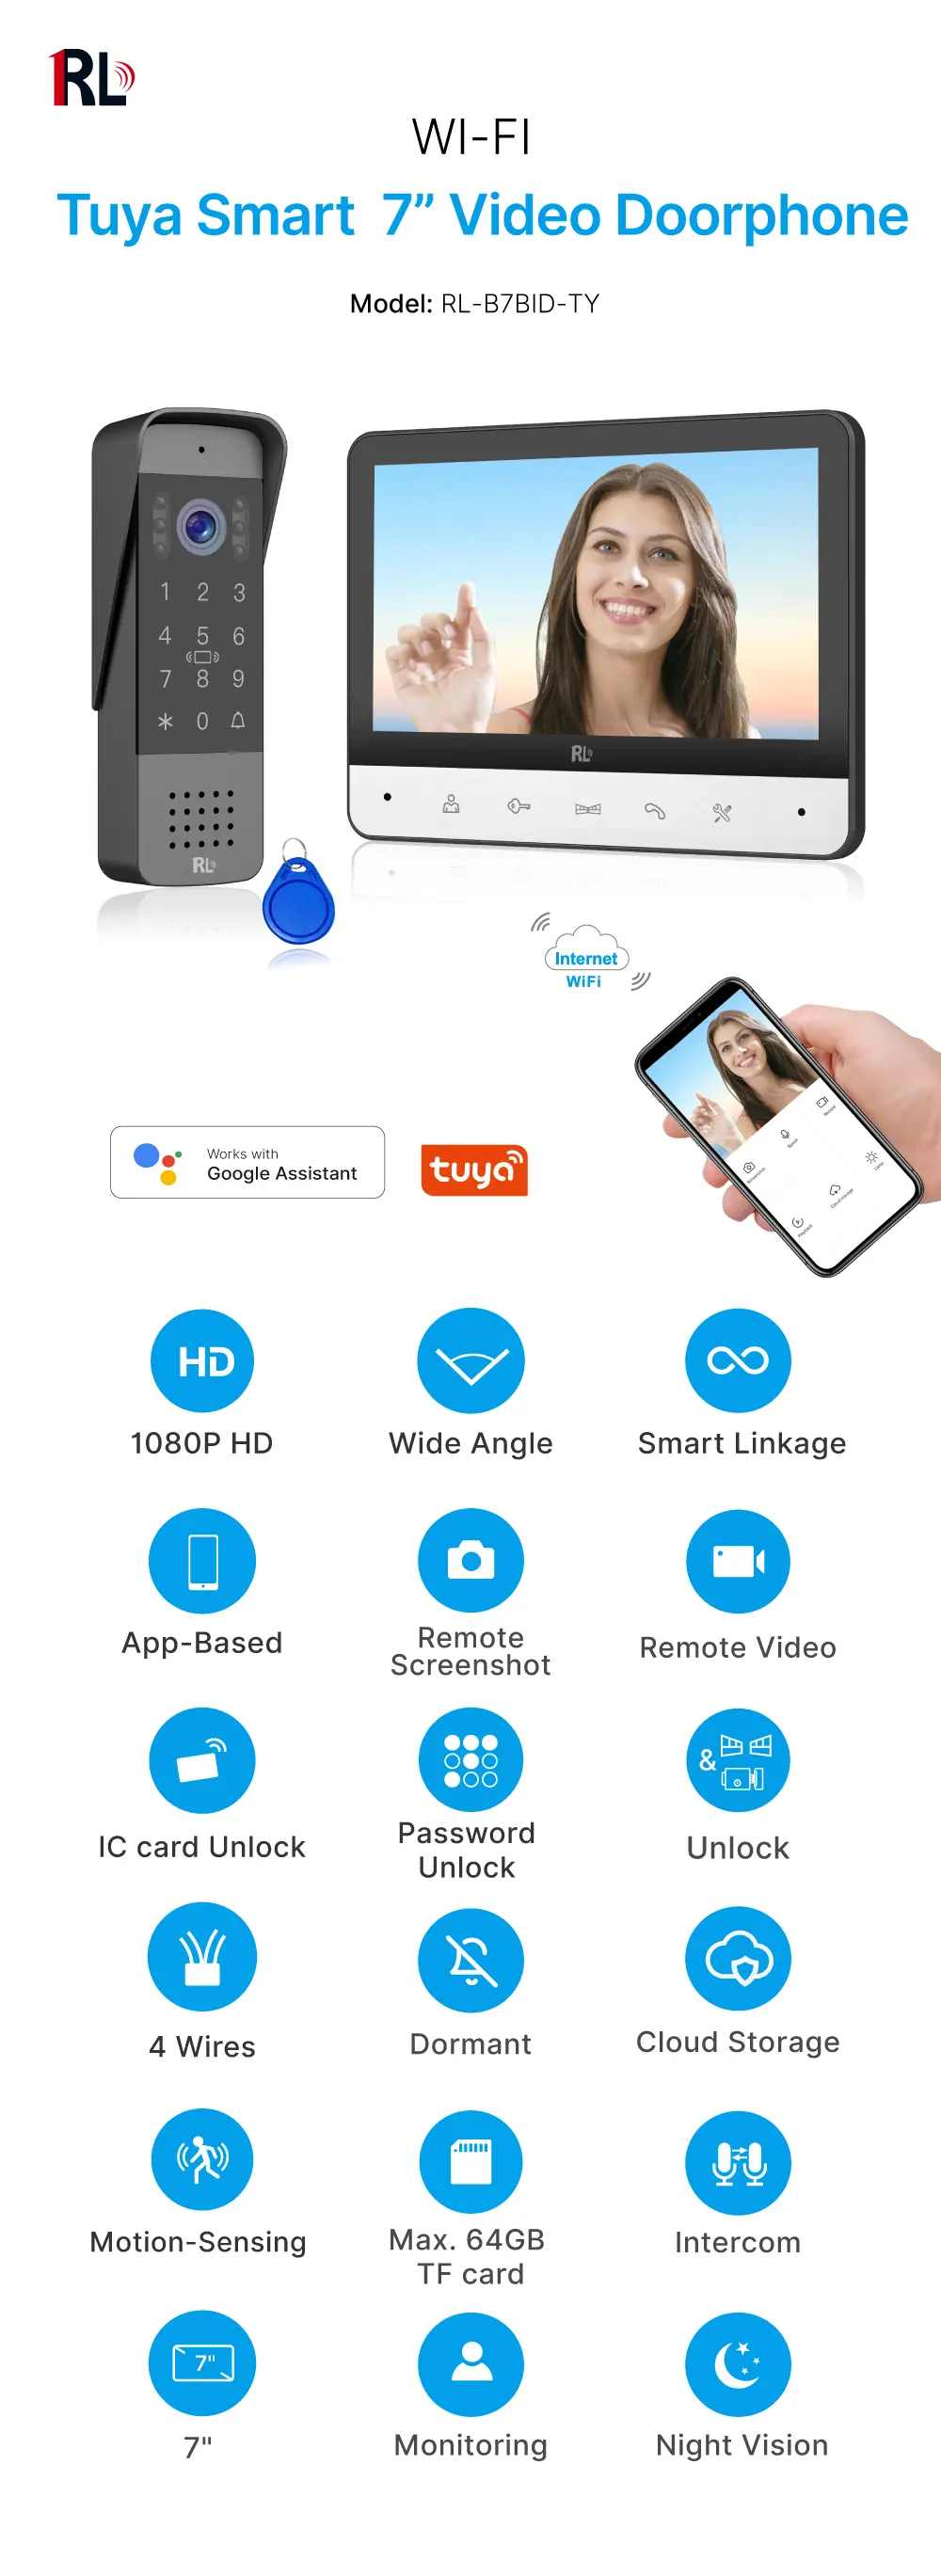 Tuya Smart 7 inch Video Doorphone #RL-B7BID-TY - Max. 64GB TF card.- IC card unlock, Password unlock.- Do not disturb function.- Max. 2 million pixels AHD camera.- Electric lock and gate lock release, unlock time can be set.- Capacitive touch buttons._01